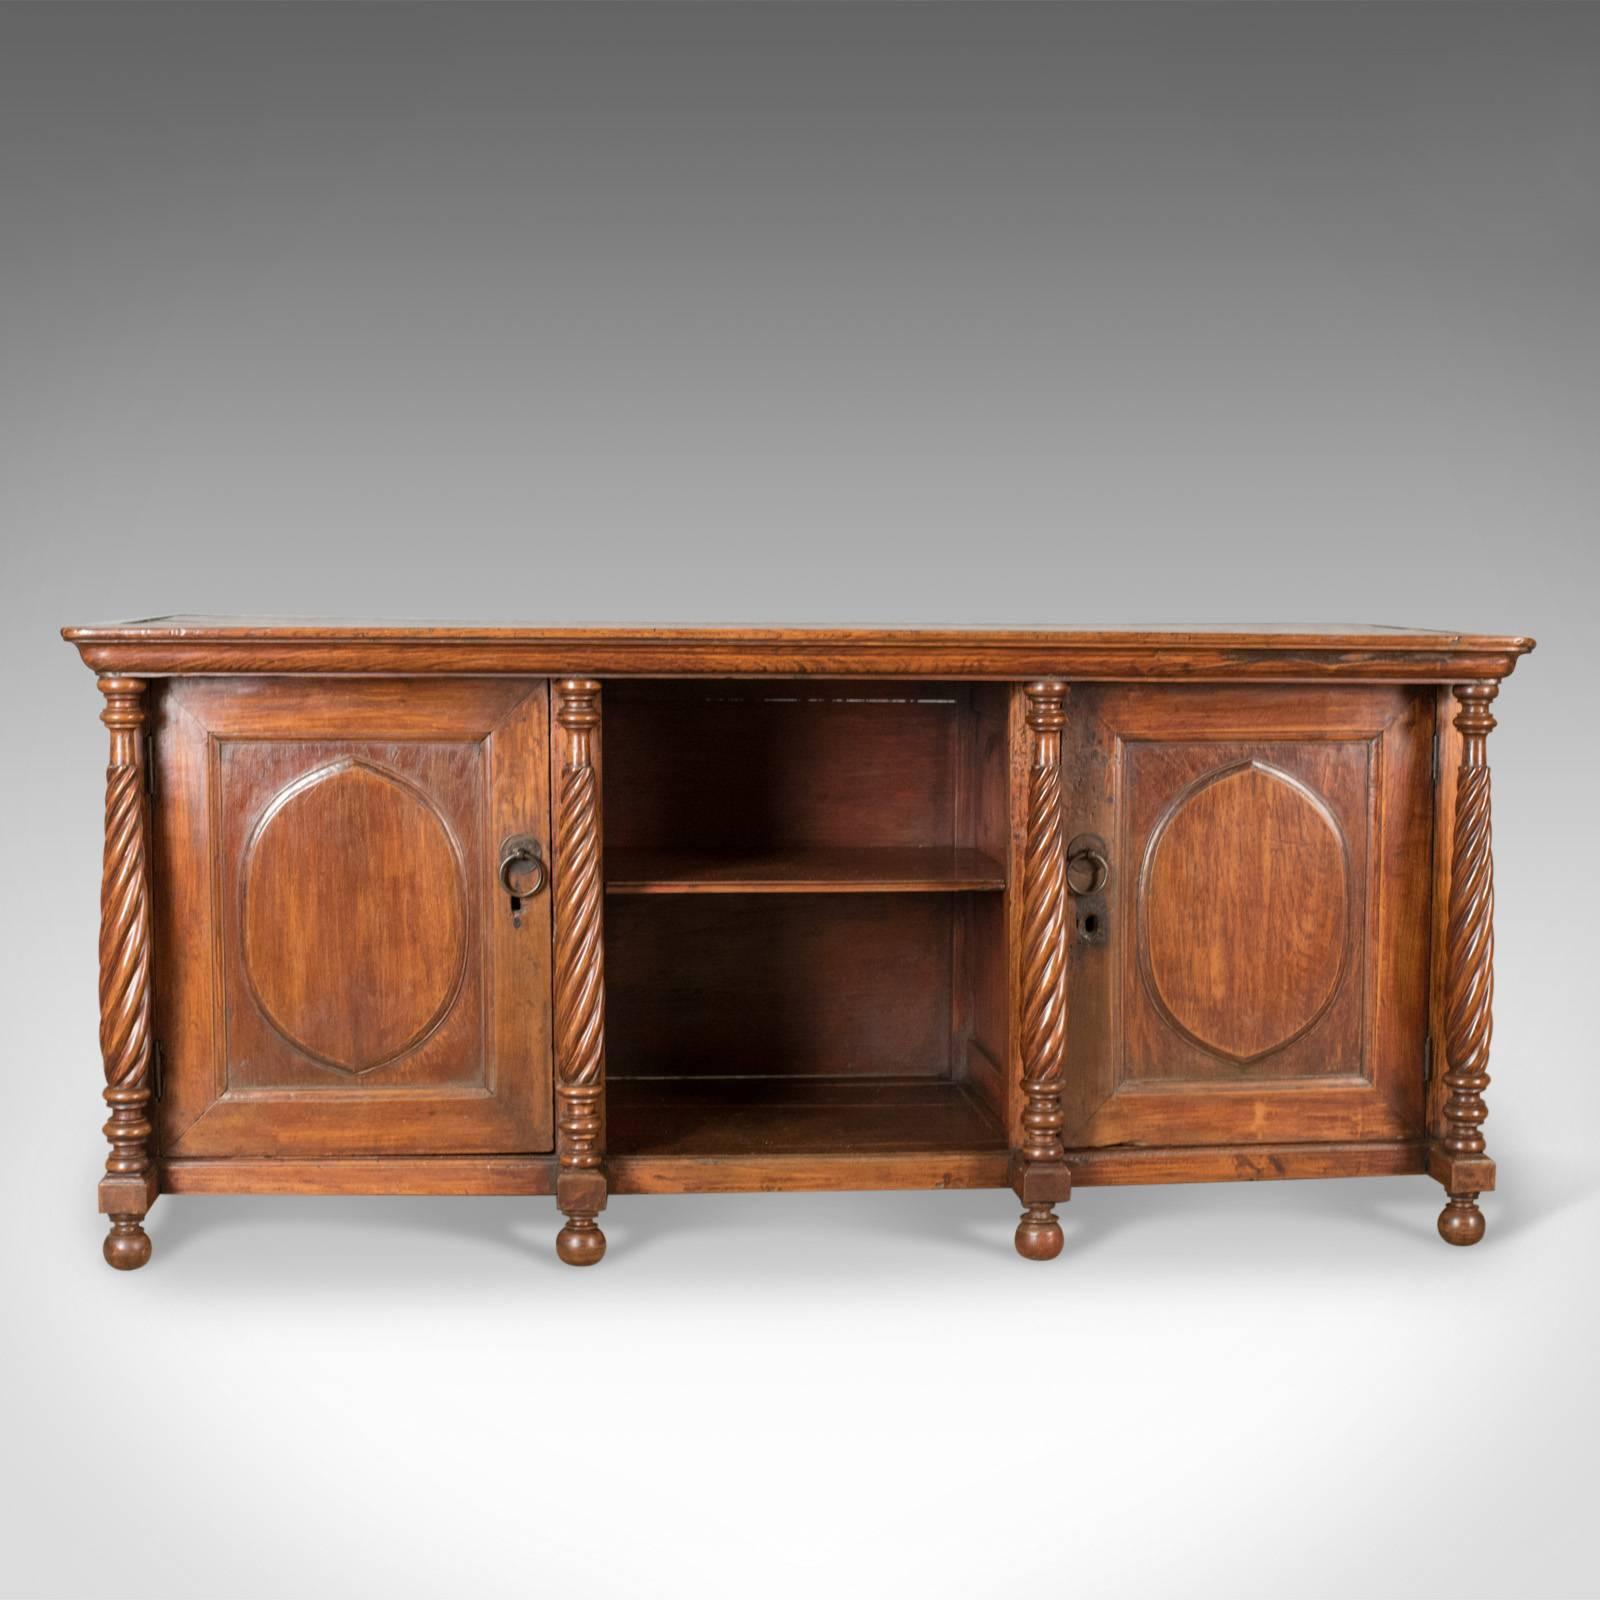 This is an antique sideboard, a colonial cabinet in fruitwood, a cupboard dating to the early 20th century.

Attractive russet tones to the fruitwood with a desirable aged patina
Raised on bun feet and featuring four, tapering barley twist